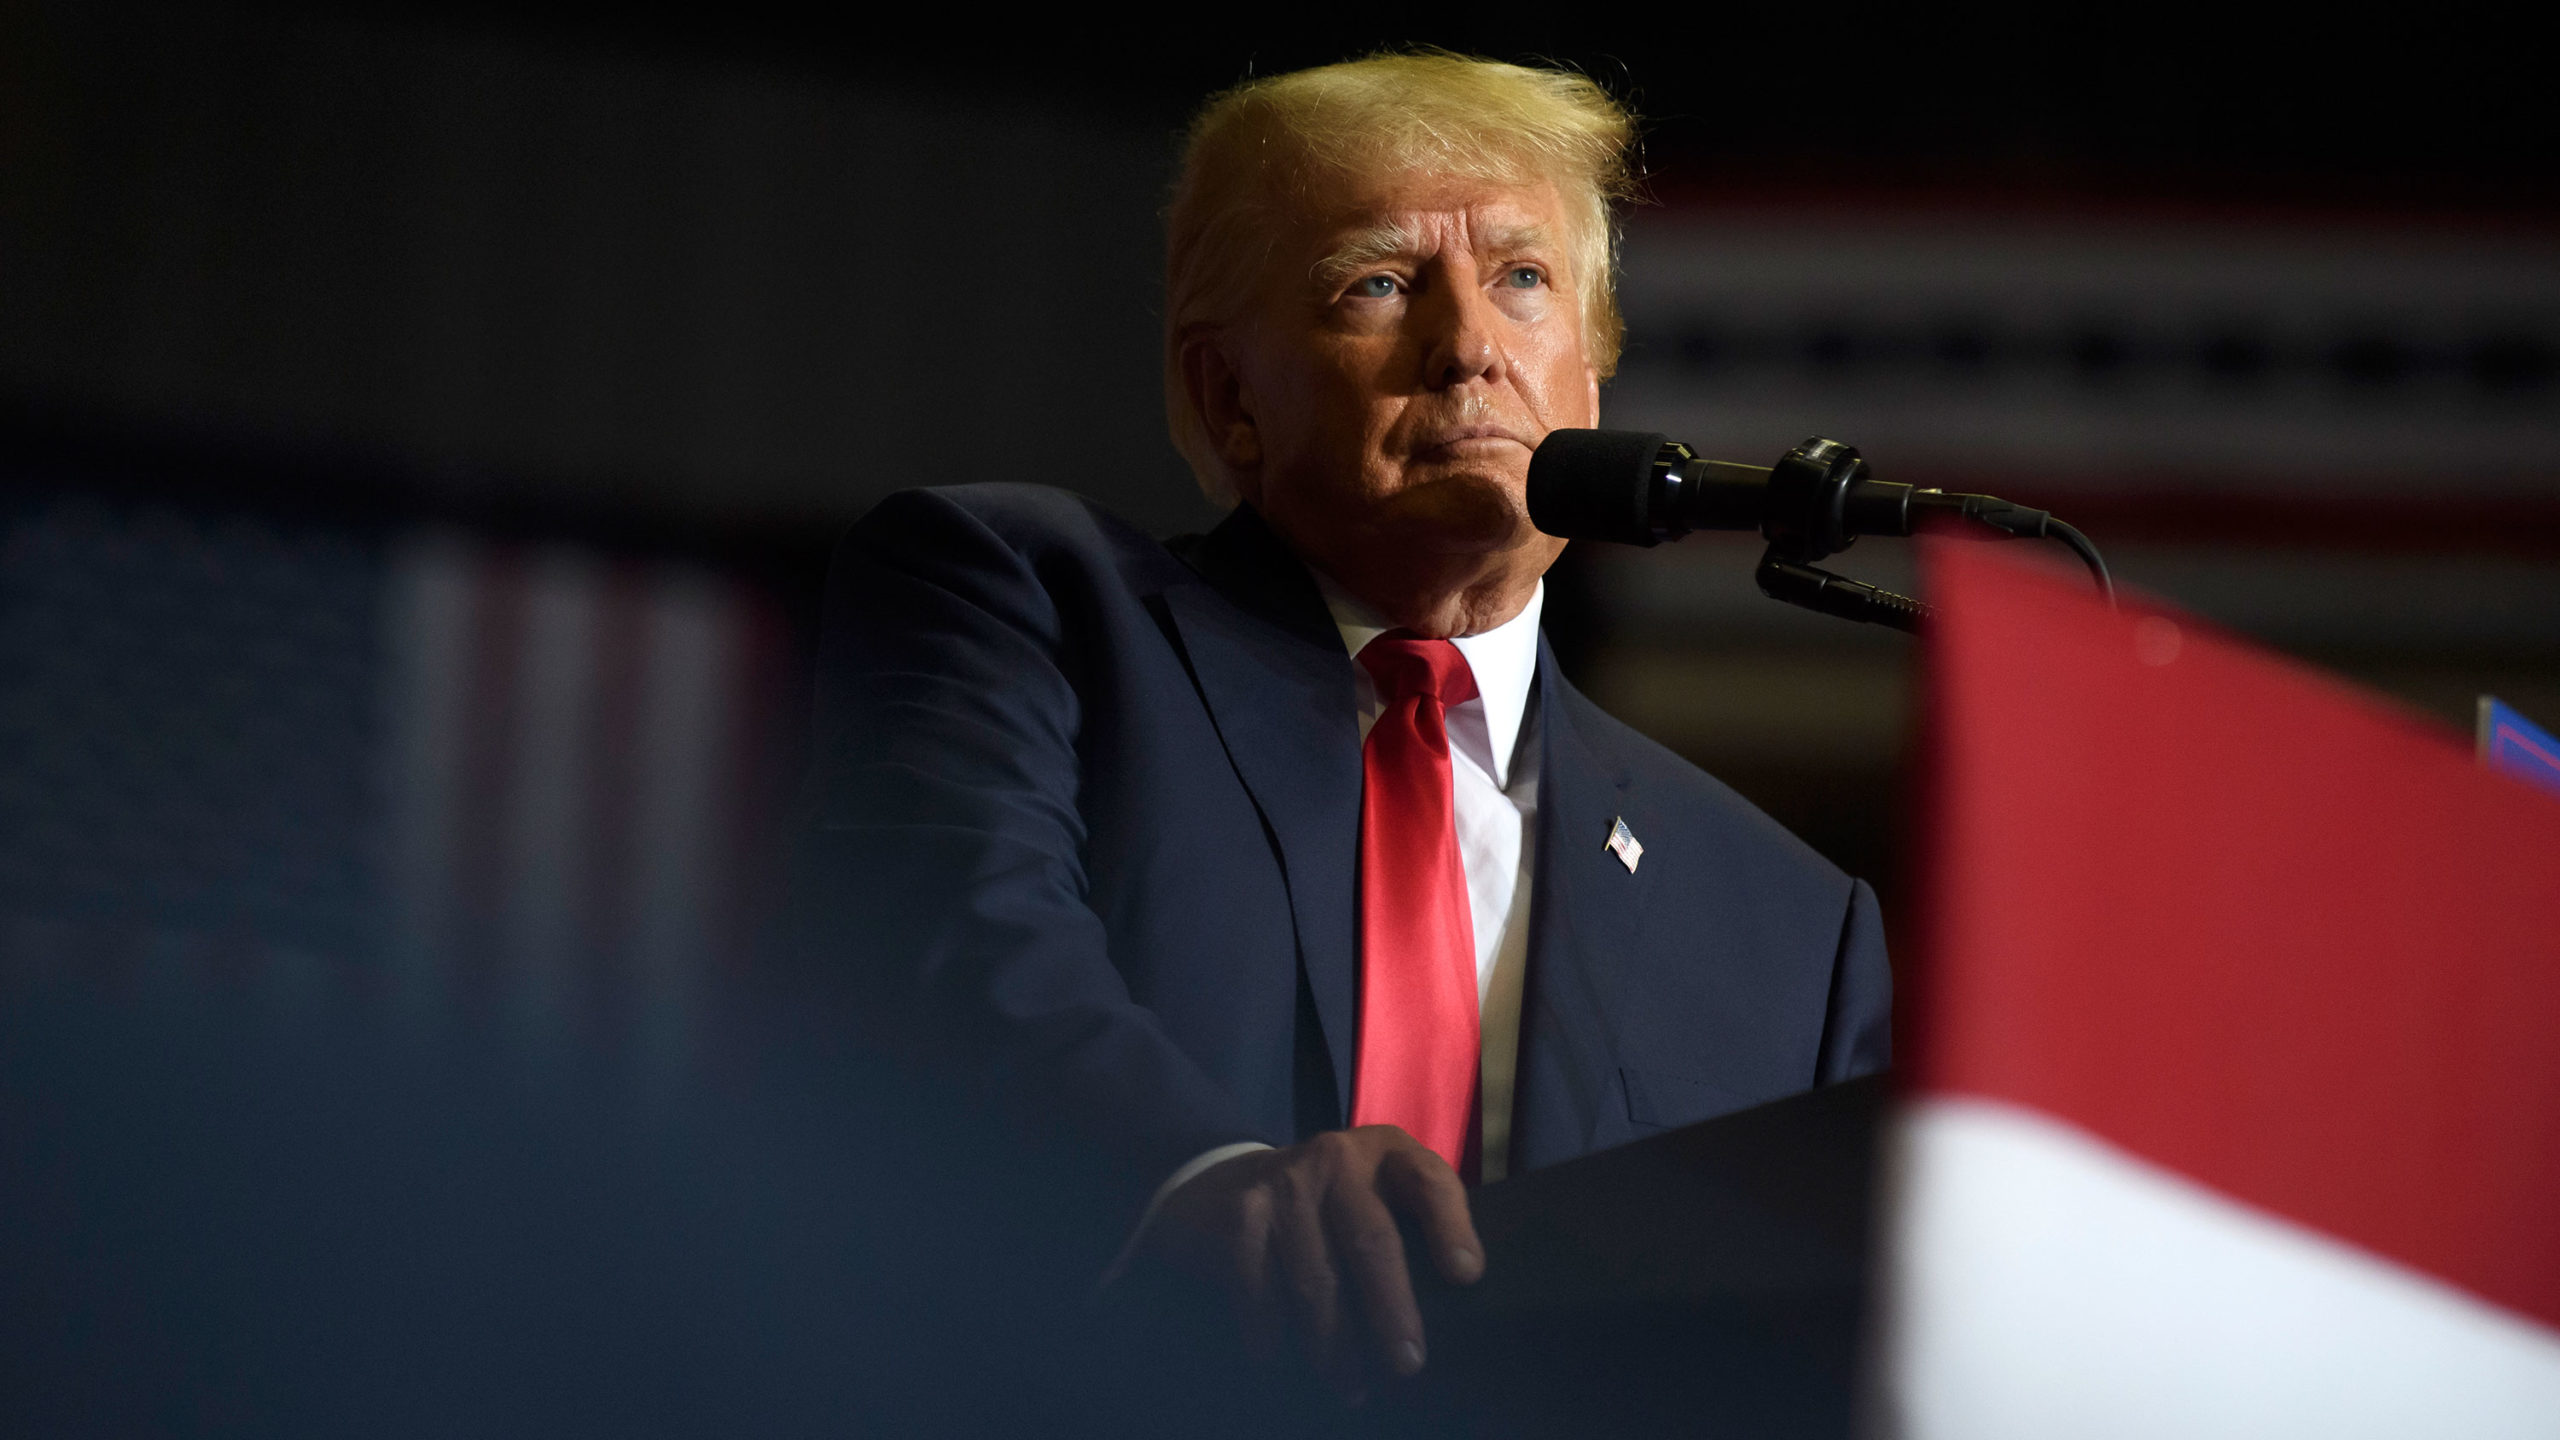 YOUNGSTOWN, OH - SEPTEMBER 17: Former President Donald Trump speaks at a Save America Rally to supp...